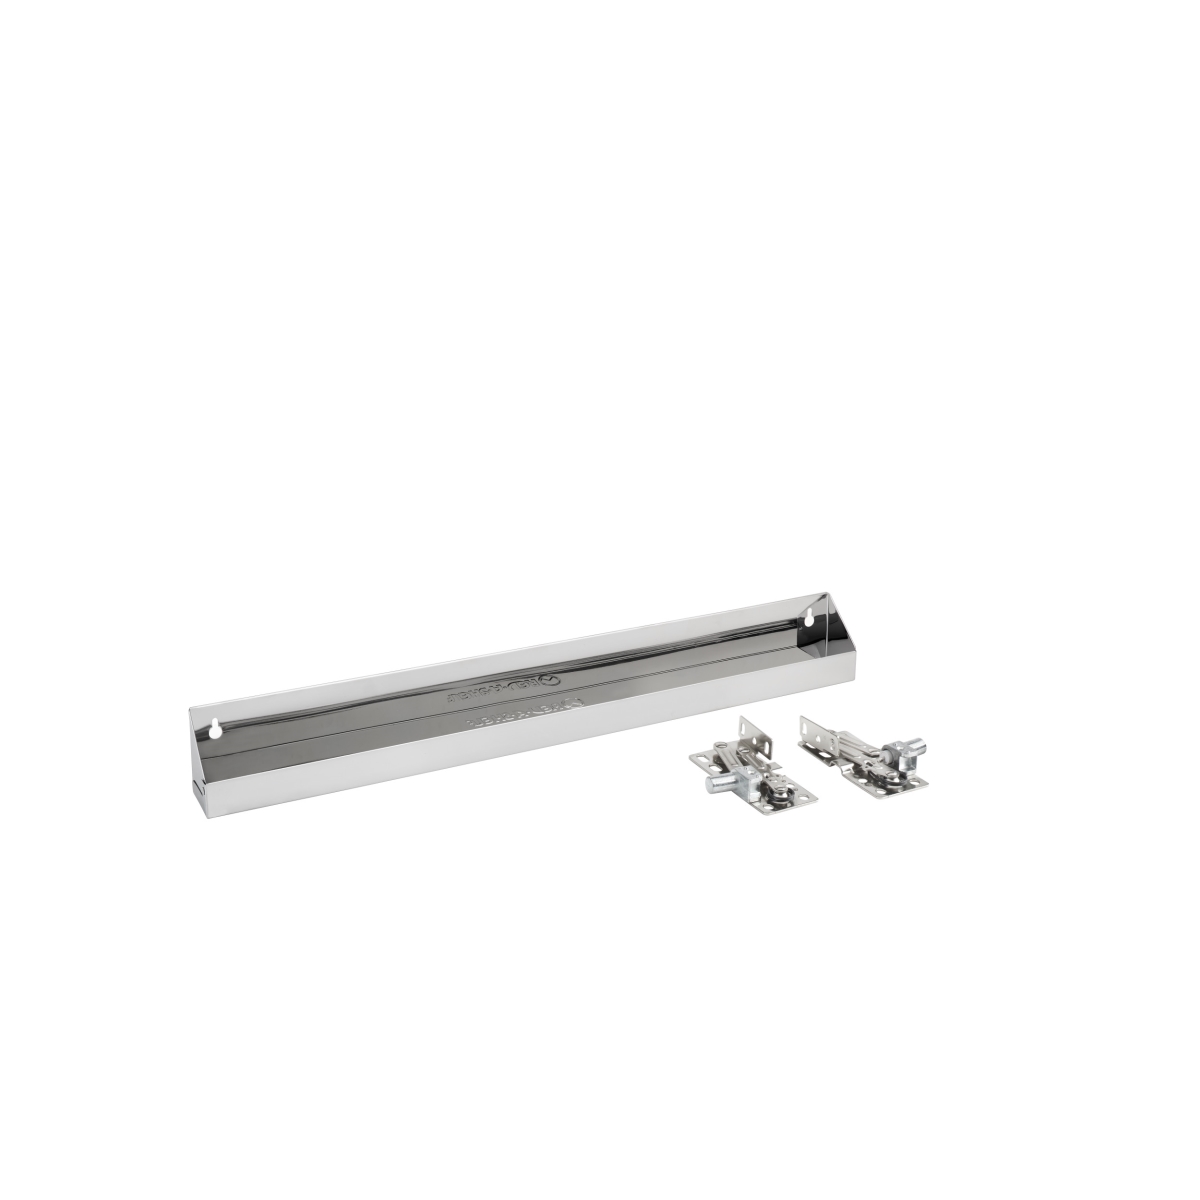 Rev A Shelf Rs6581.25sc.52 25 In. Tip Out Tray Sets With Soft Close - Stainless Steel